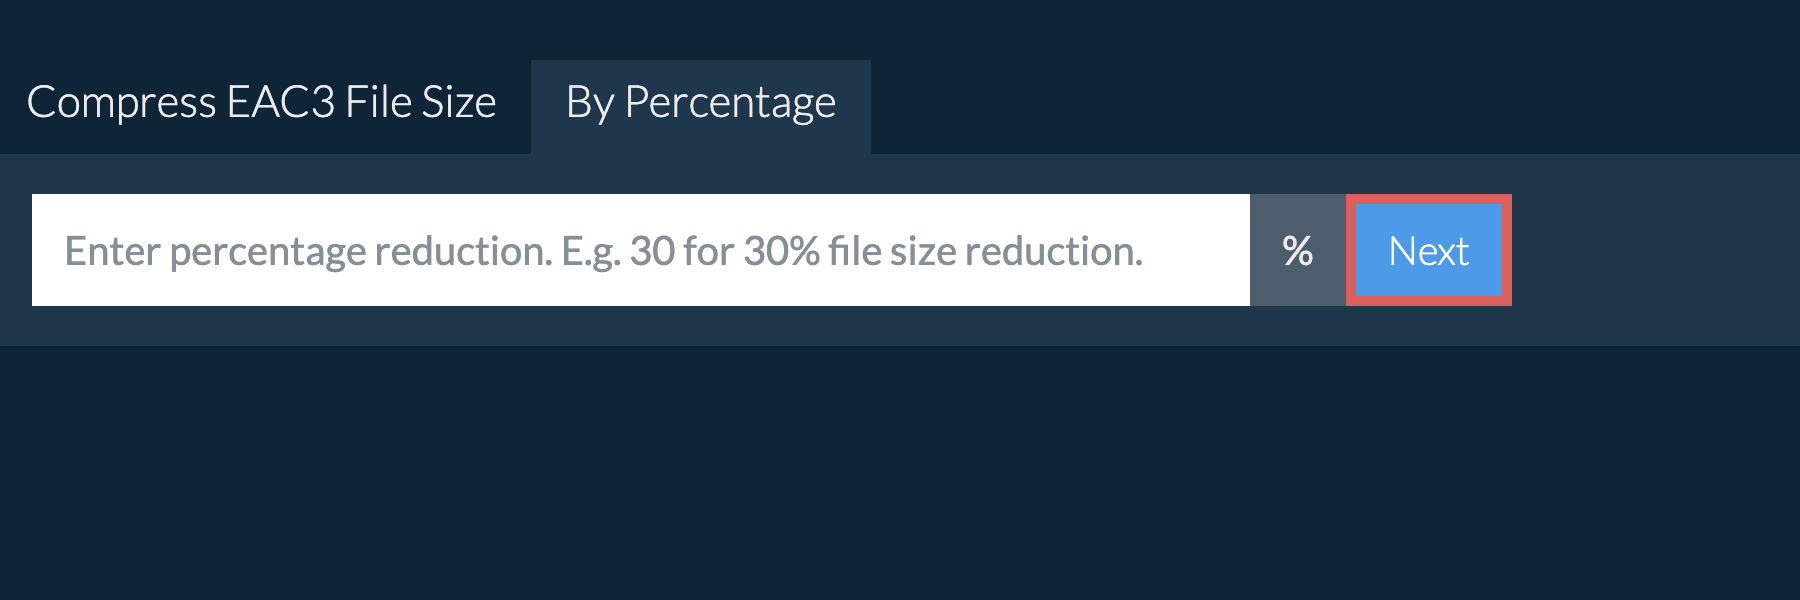 Reduce eac3 By Percentage